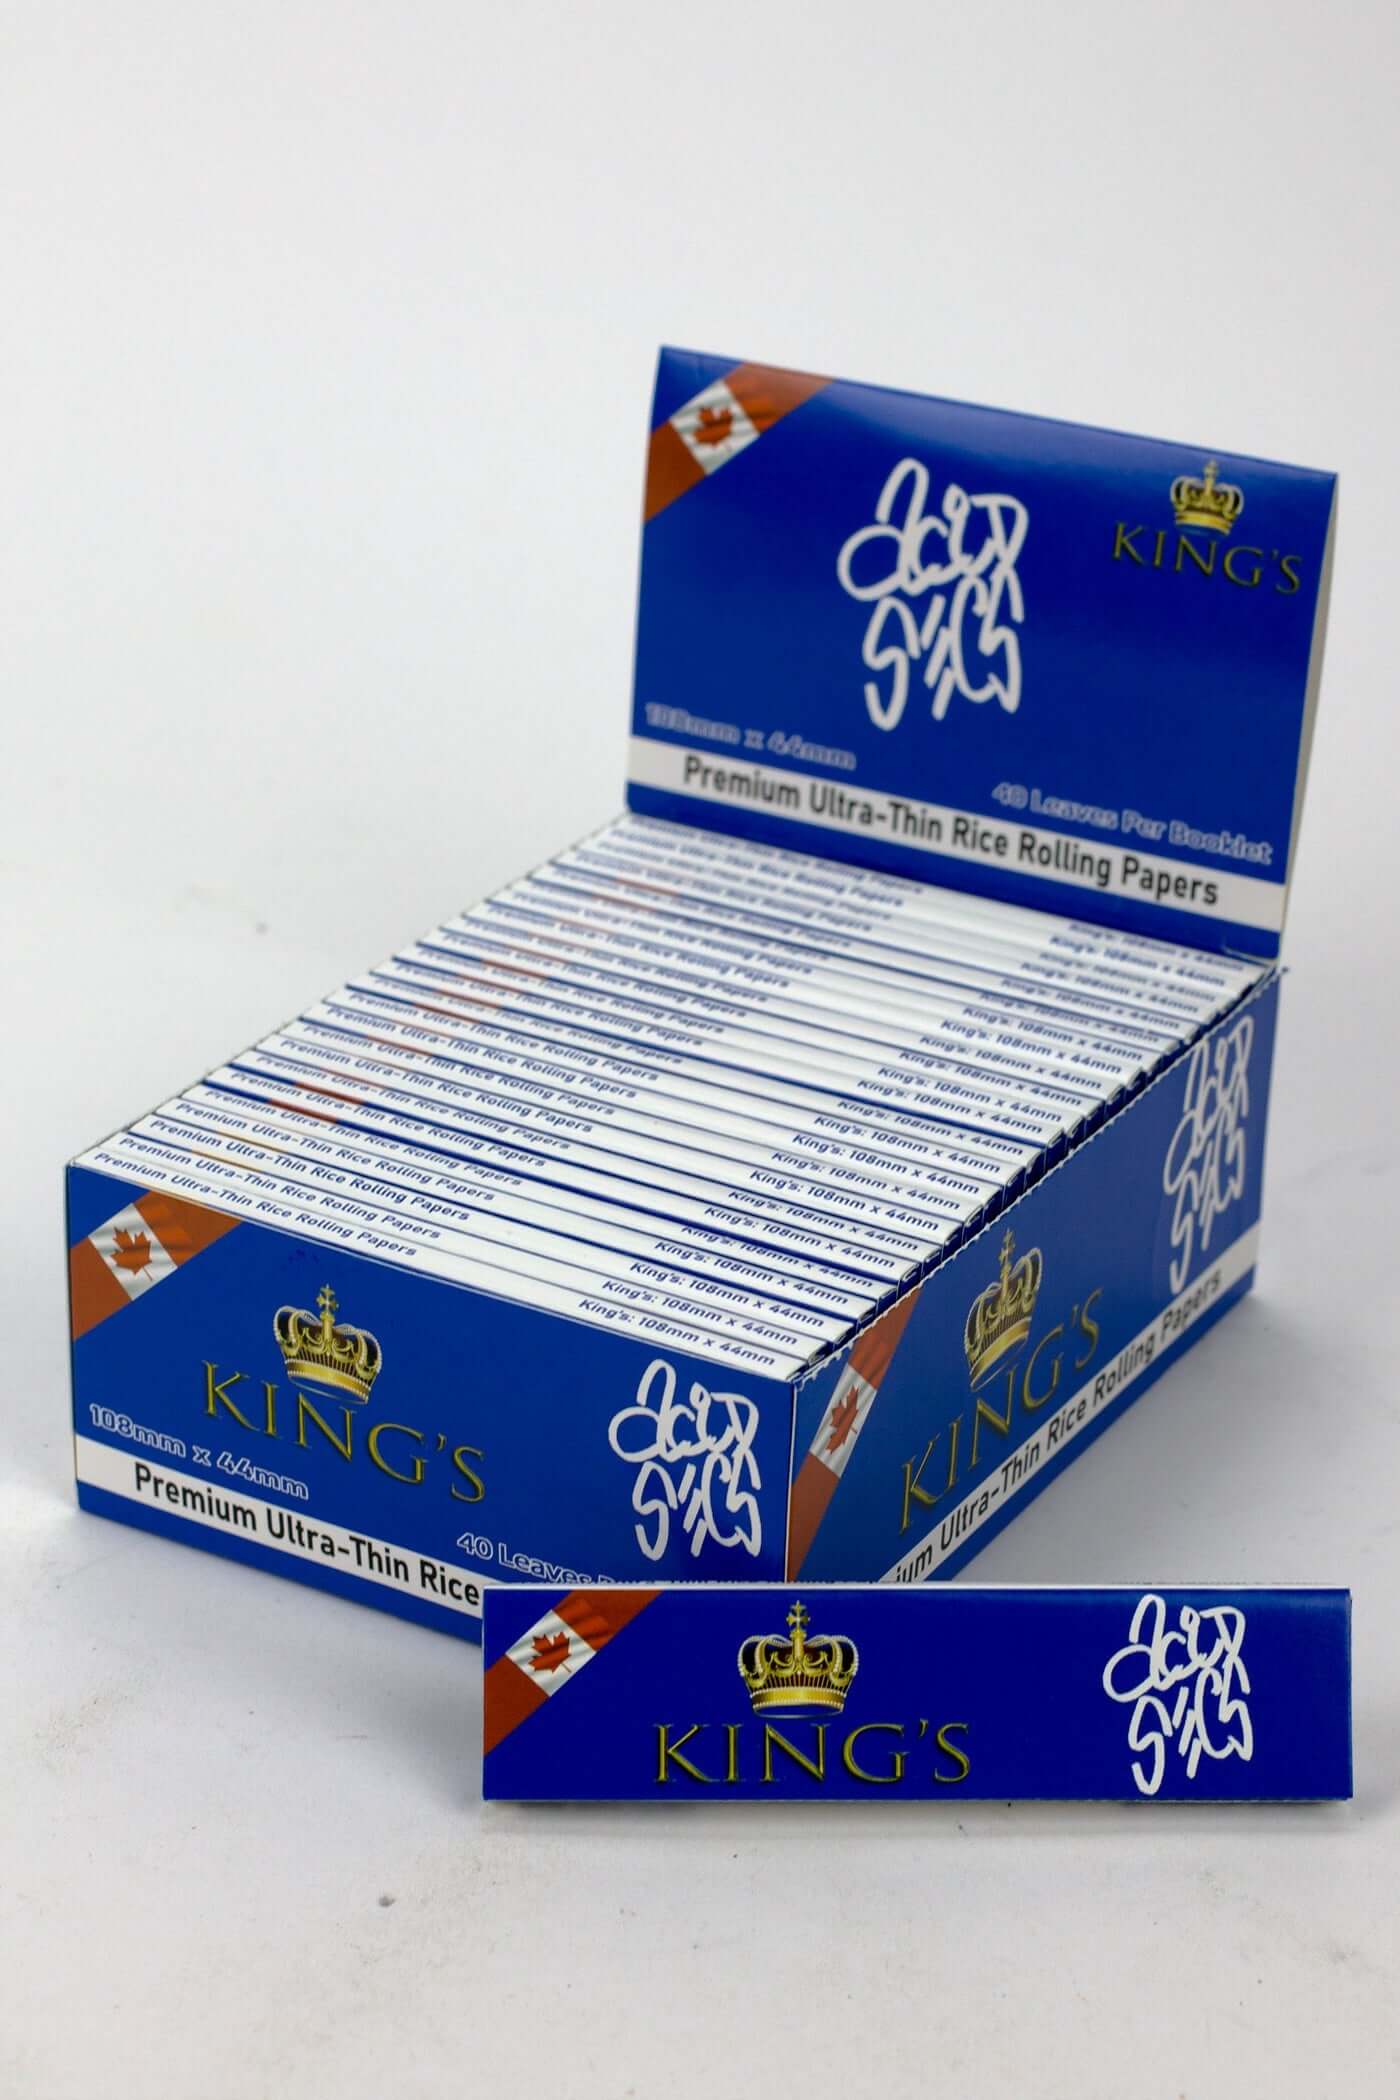 Acid Secs - Ultra Thin Rice King's Rolling Papers
Acid Secs Productions Inc.
Acid Secs paper was created out of a desire to return to a simple rice paper rolling paper. Made with no chemicals, pulp, or additives, these rolling papers are pure rice paper. Burning extra slow and extra clean, these rolling papers leave no residue Size: 108mm x 44mm Weight/Thickness: 13gsm Quantity: 40 leaves per pack 50 packs per box. Eligible for $15 Flat Rate Shipping
1-1/4, 100 bucks, 100 dollar, 100% silver, 24K, 24K gold,